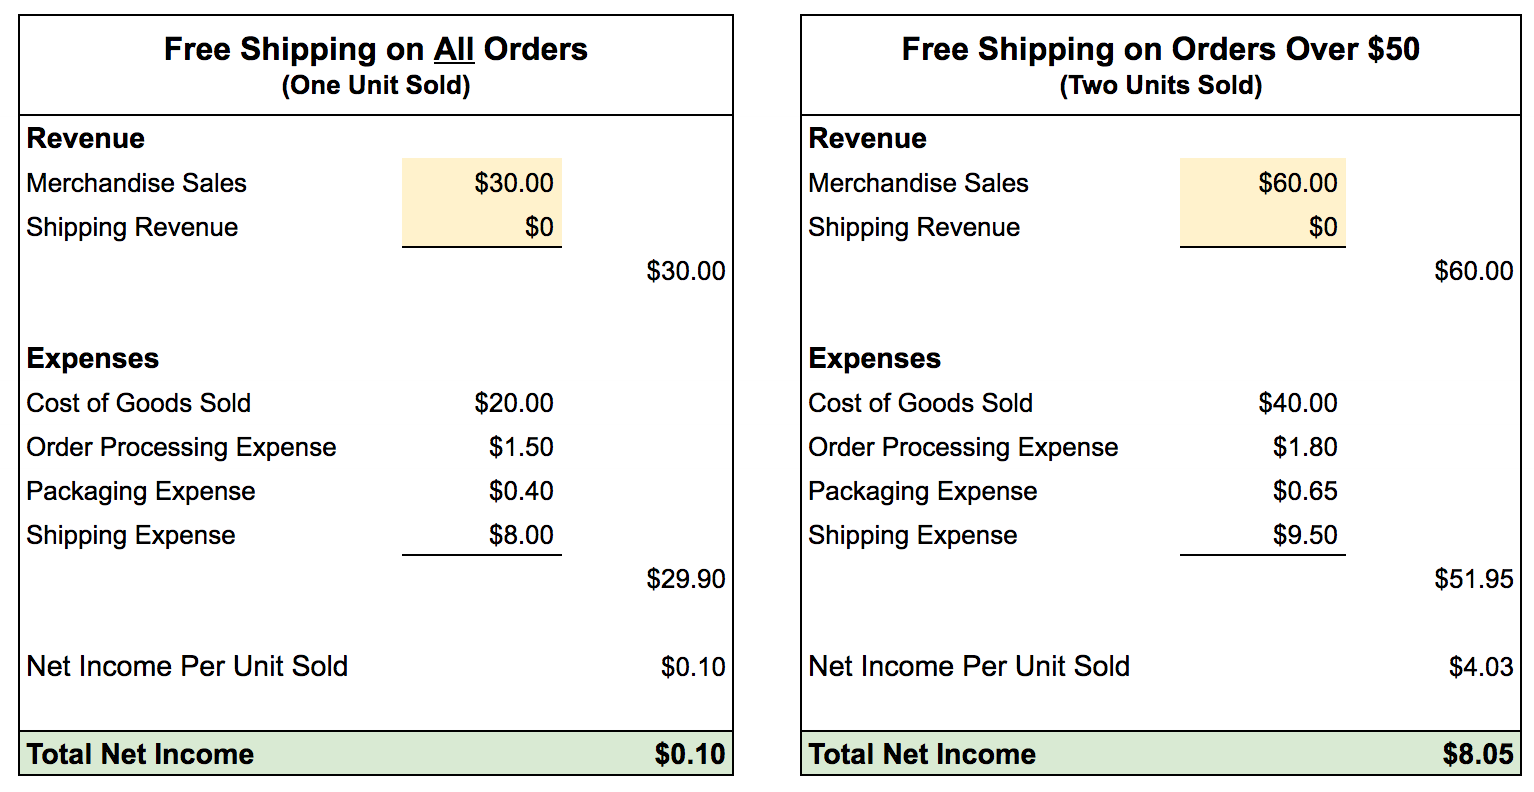 In this example, offering free shipping on just one item yields a net income of only $0.10. If you sell two items and ship them for free the net income increases to $8.05. <em>(Click image to enlarge.)</em>